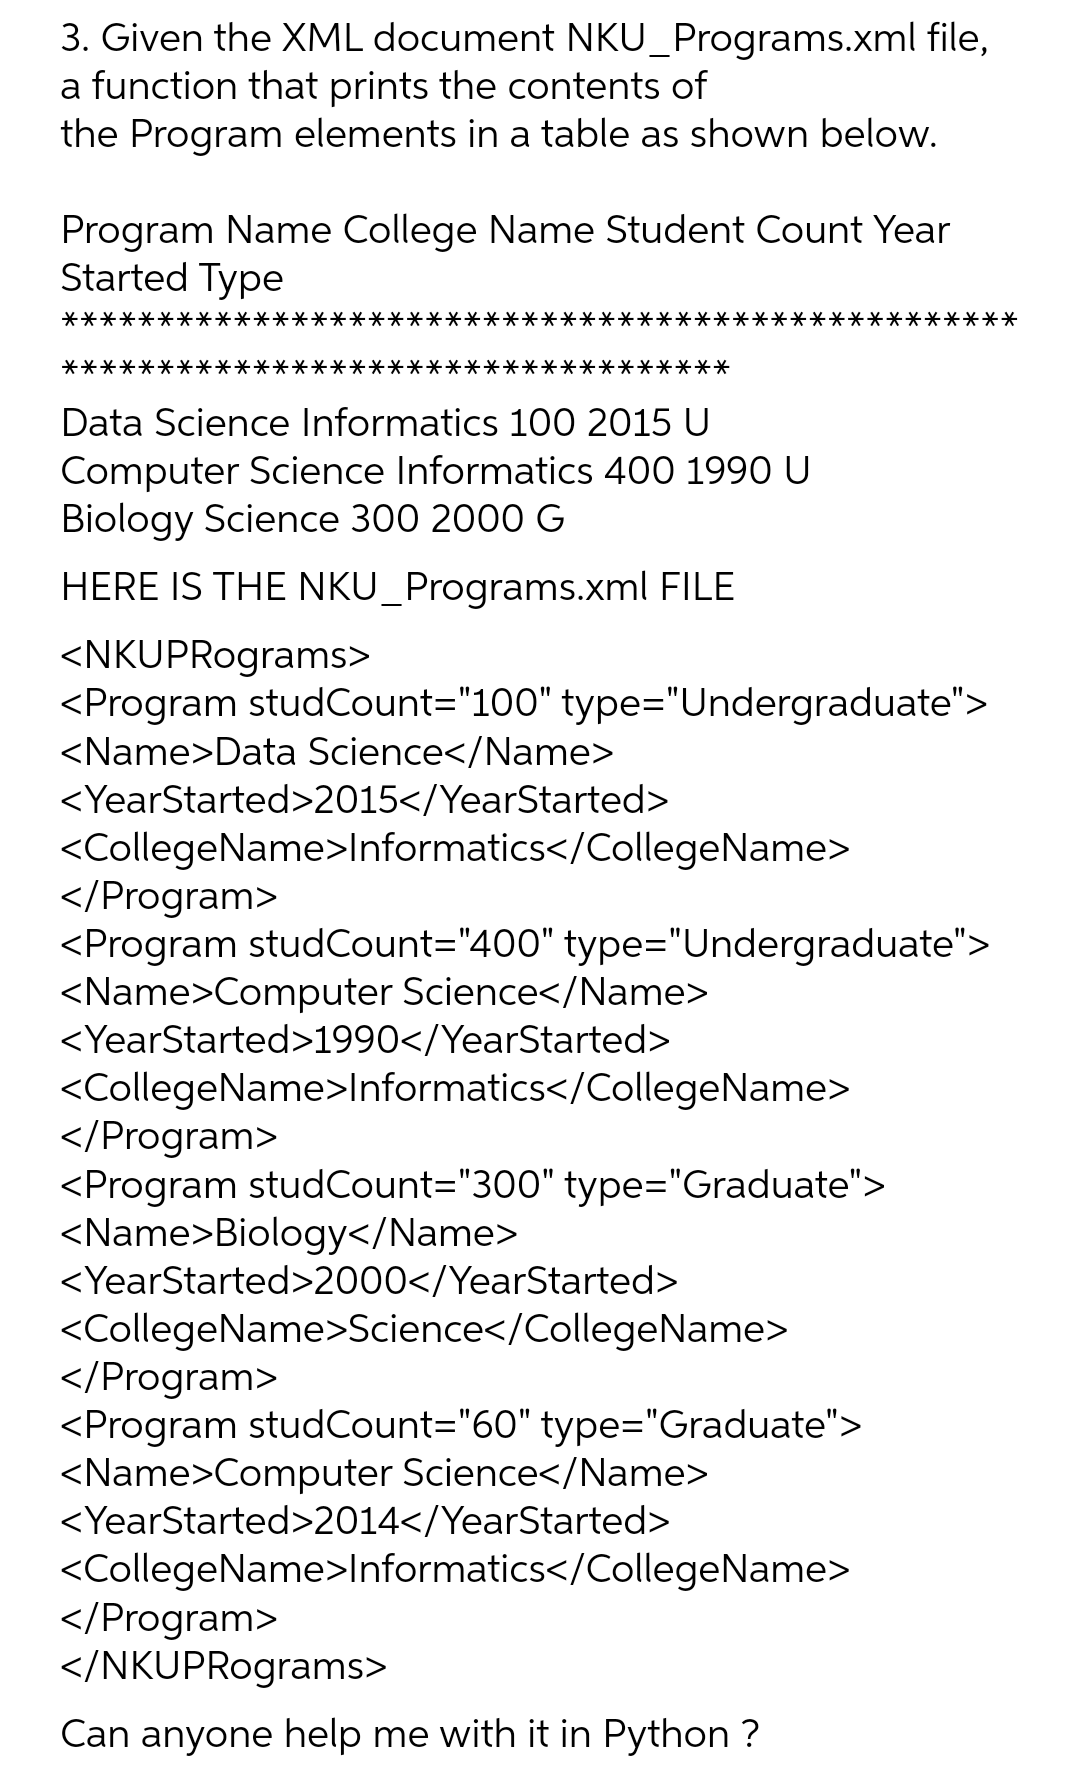 3. Given the XML document NKU_Programs.xml file,
a function that prints the contents of
the Program elements in a table as shown below.
Program Name College Name Student Count Year
Started Type
***
****·
****************
*********
Data Science Informatics 100 2015 U
Computer Science Informatics 400 1990 U
Biology Science 300 2000 G
HERE IS THE NKU_Programs.xml FILE
<NKUPRograms>
<Program studCount="100" type="Undergraduate">
<Name>Data Science</Name>
<YearStarted>2015</YearStarted>
<CollegeName>Informatics</CollegeName>
</Program>
<Program studCount="400" type="Undergraduate">
<Name>Computer Science</Name>
<YearStarted>1990</YearStarted>
<CollegeName>Informatics</CollegeName>
</Program>
<Program studCount="300" type="Graduate">
<Name>Biology</Name>
<YearStarted>2000</YearStarted>
<CollegeName>Science</CollegeName>
</Program>
<Program studCount="60" type="Graduate">
<Name>Computer Science</Name>
********
<YearStarted>2014</YearStarted>
<CollegeName>Informatics</CollegeName>
</Program>
</NKUPRograms>
Can anyone help me with it in Python ?